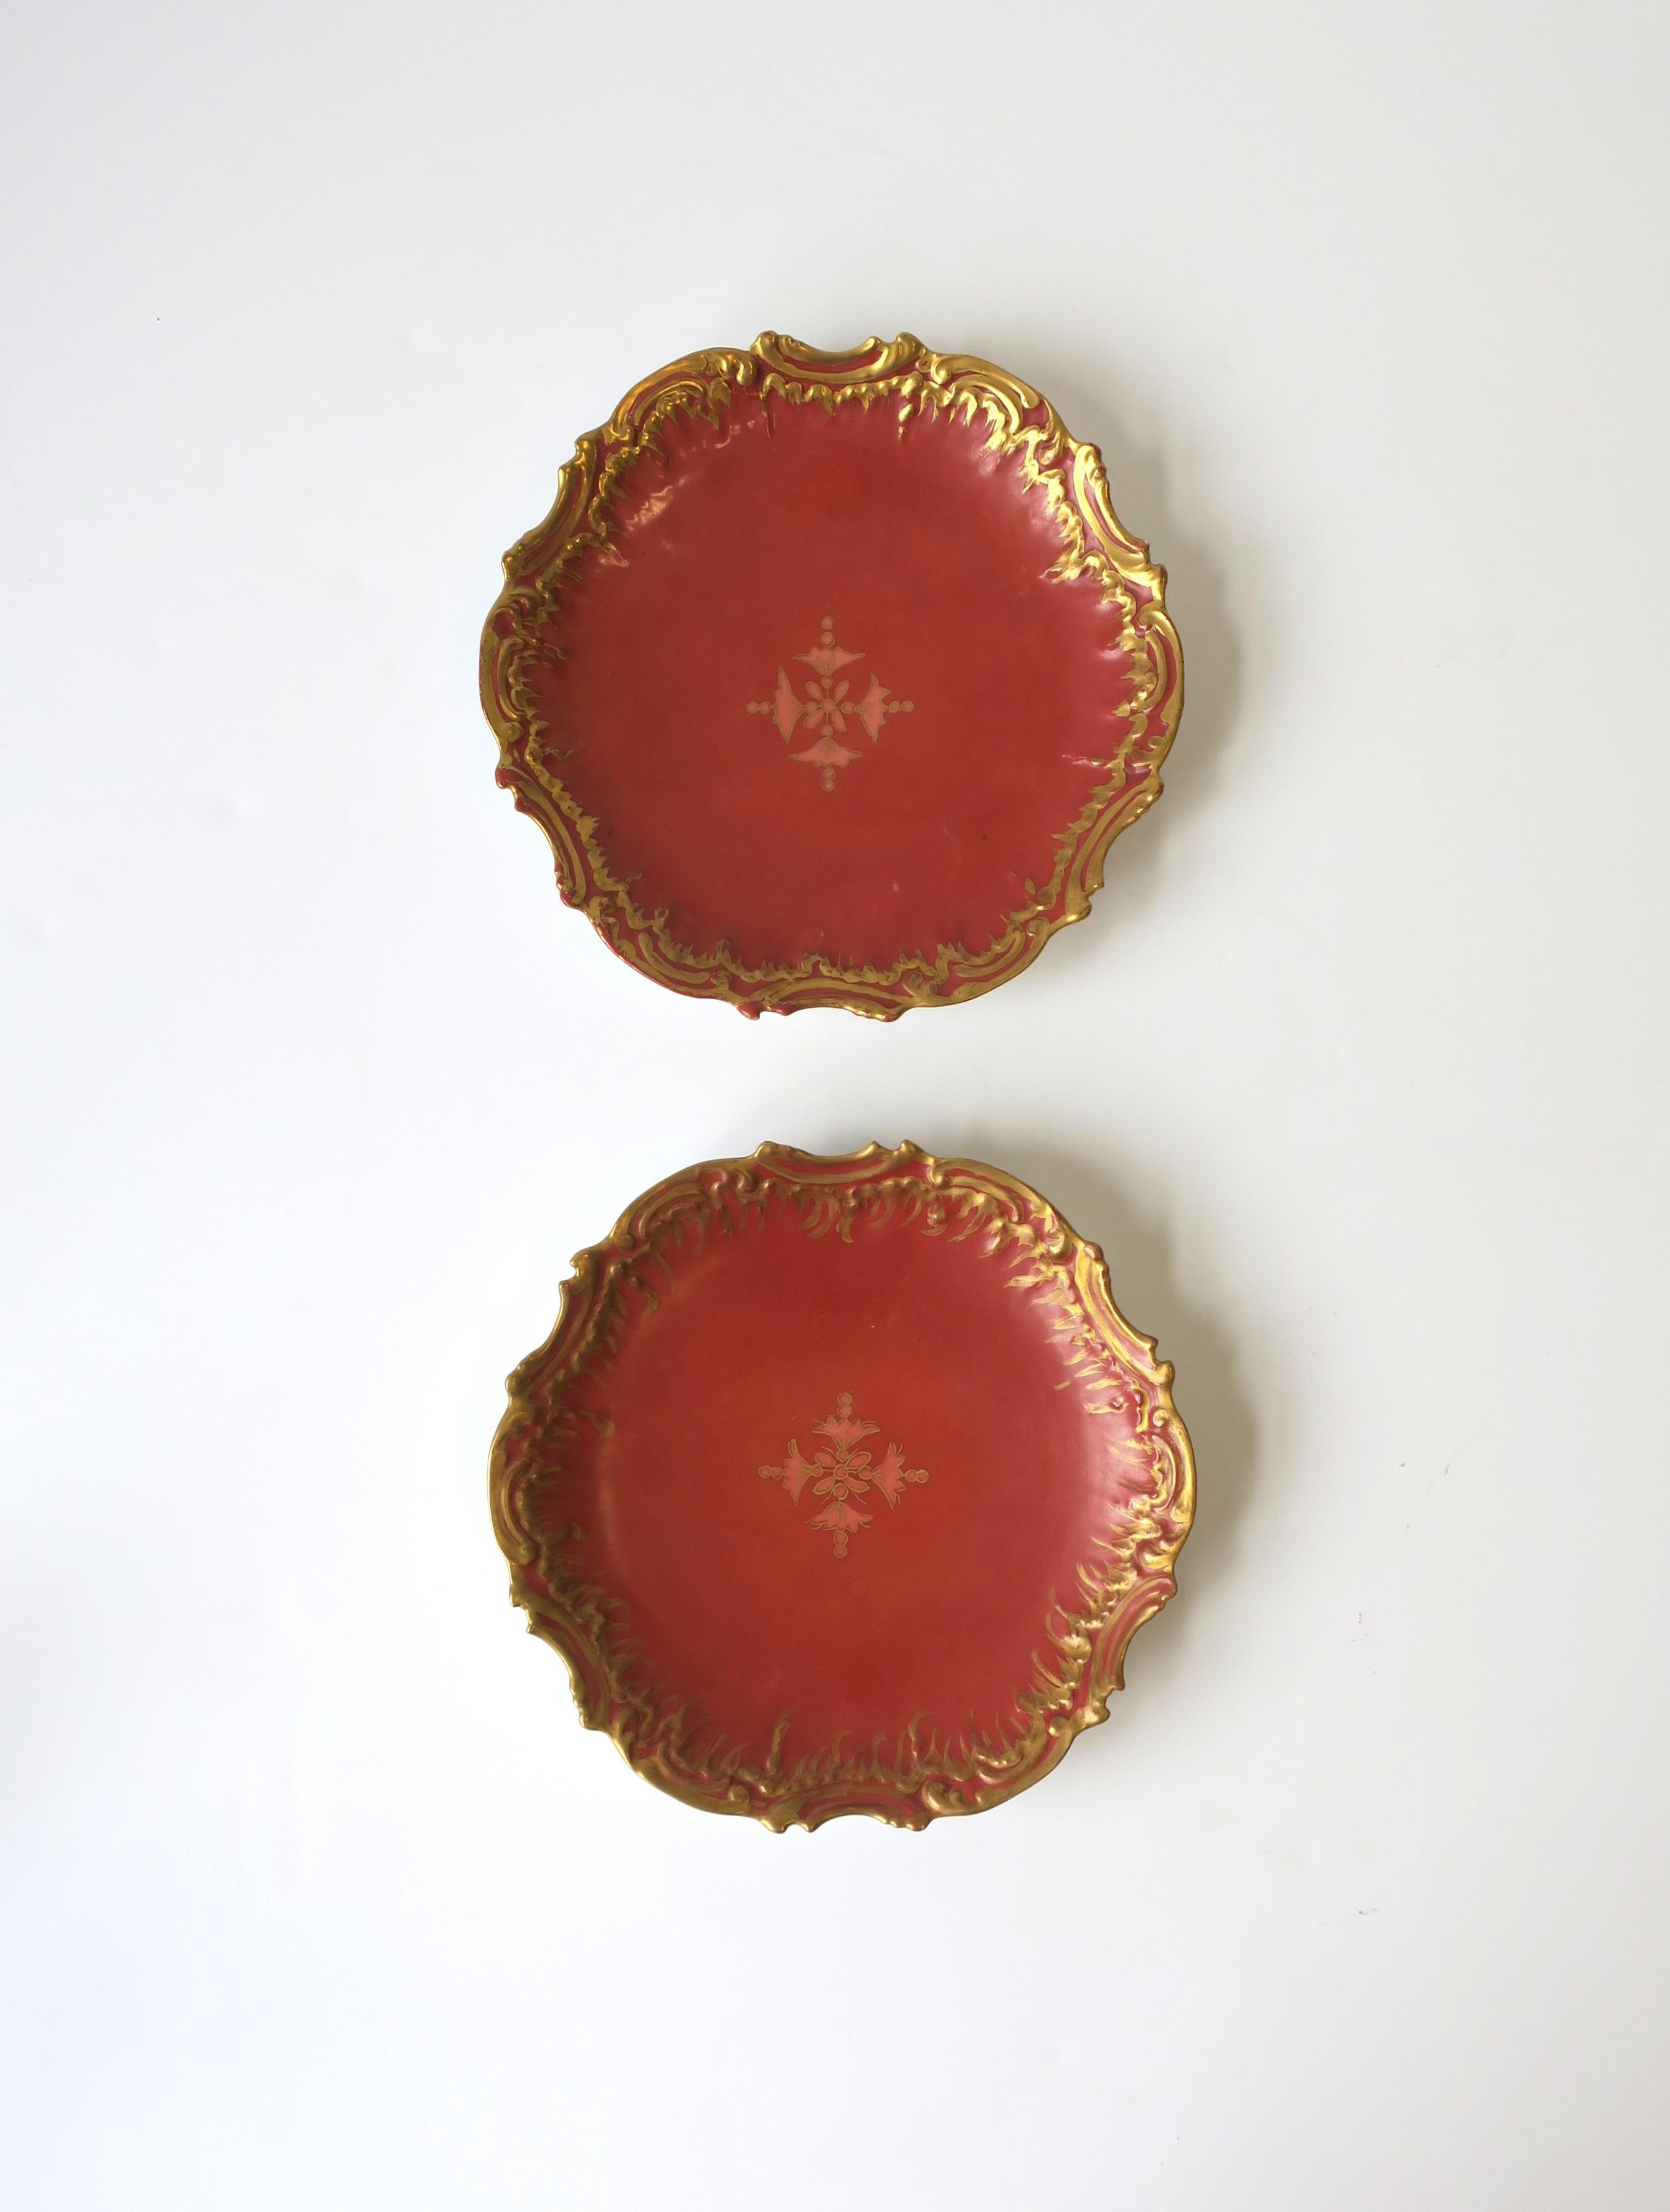 A beautiful pair of antique French Limoges porcelain terracotta, pink and gold plates, circa 19th century, France. Plates are predominantly a terracotta hue with a carnation pink center design, and a hand-painted gold decorative edge. A great set